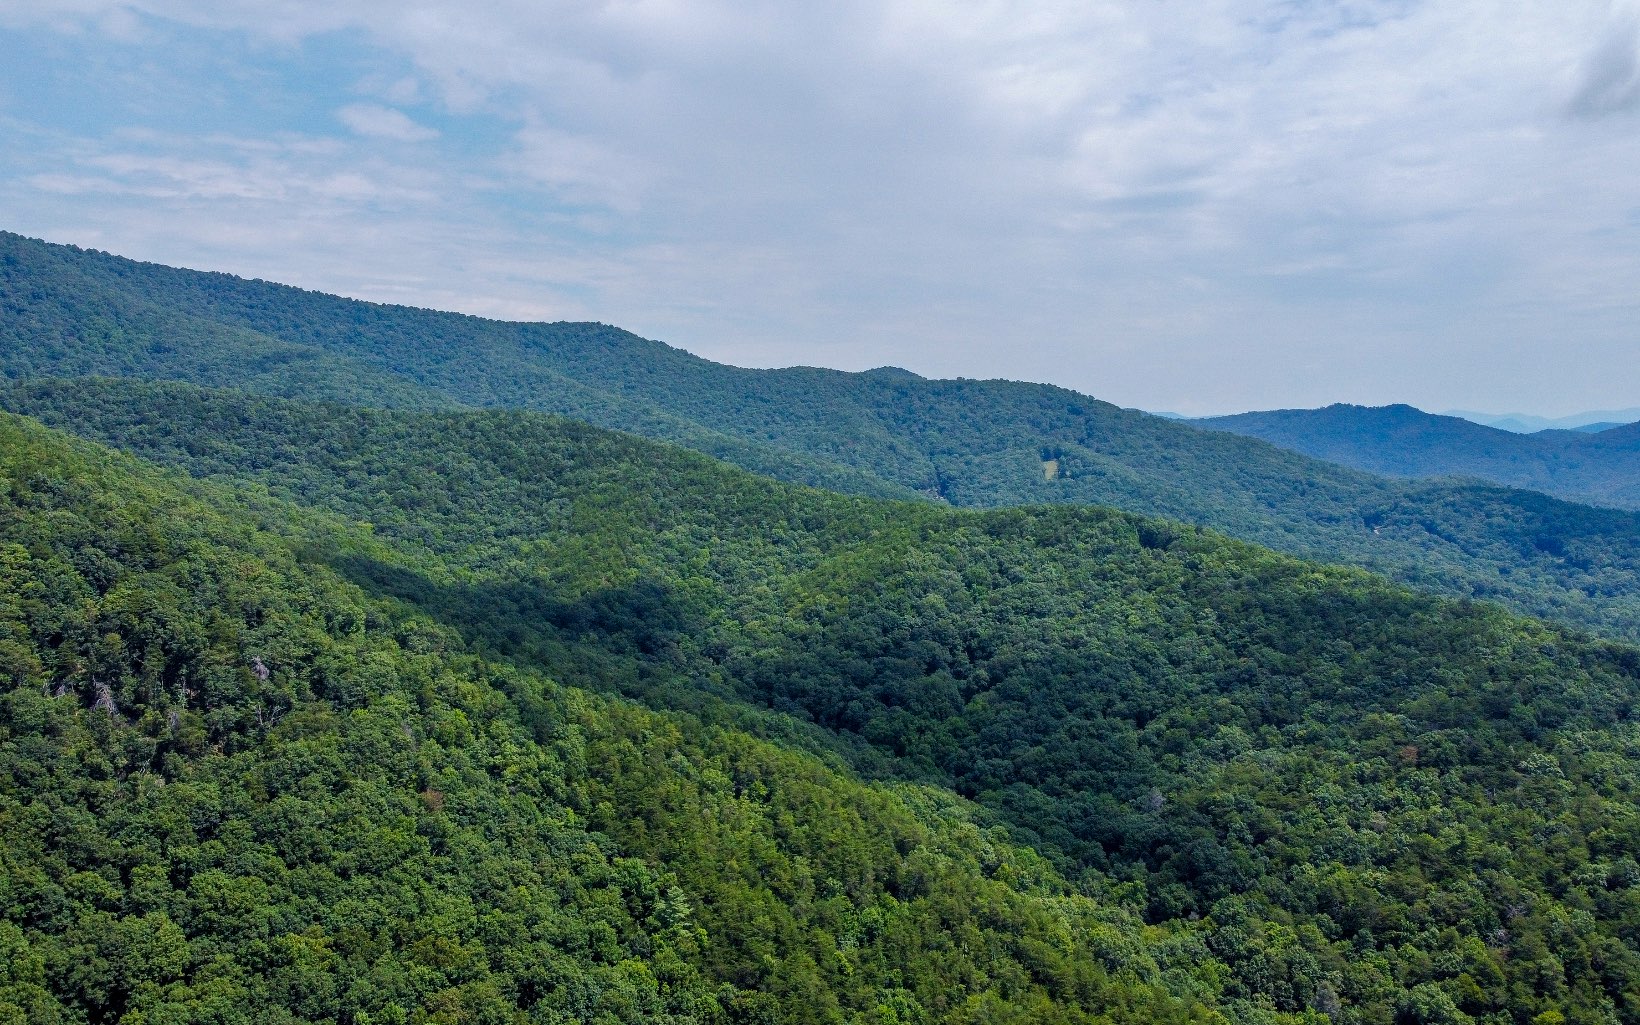 Private Acreage with Views of Rich Mountain Wilderness! Beautiful 4.88 Acres Bordering USFS with Utilities to Property Line and Large Hardwoods. Located just 15 minutes from Downtown Ellijay.